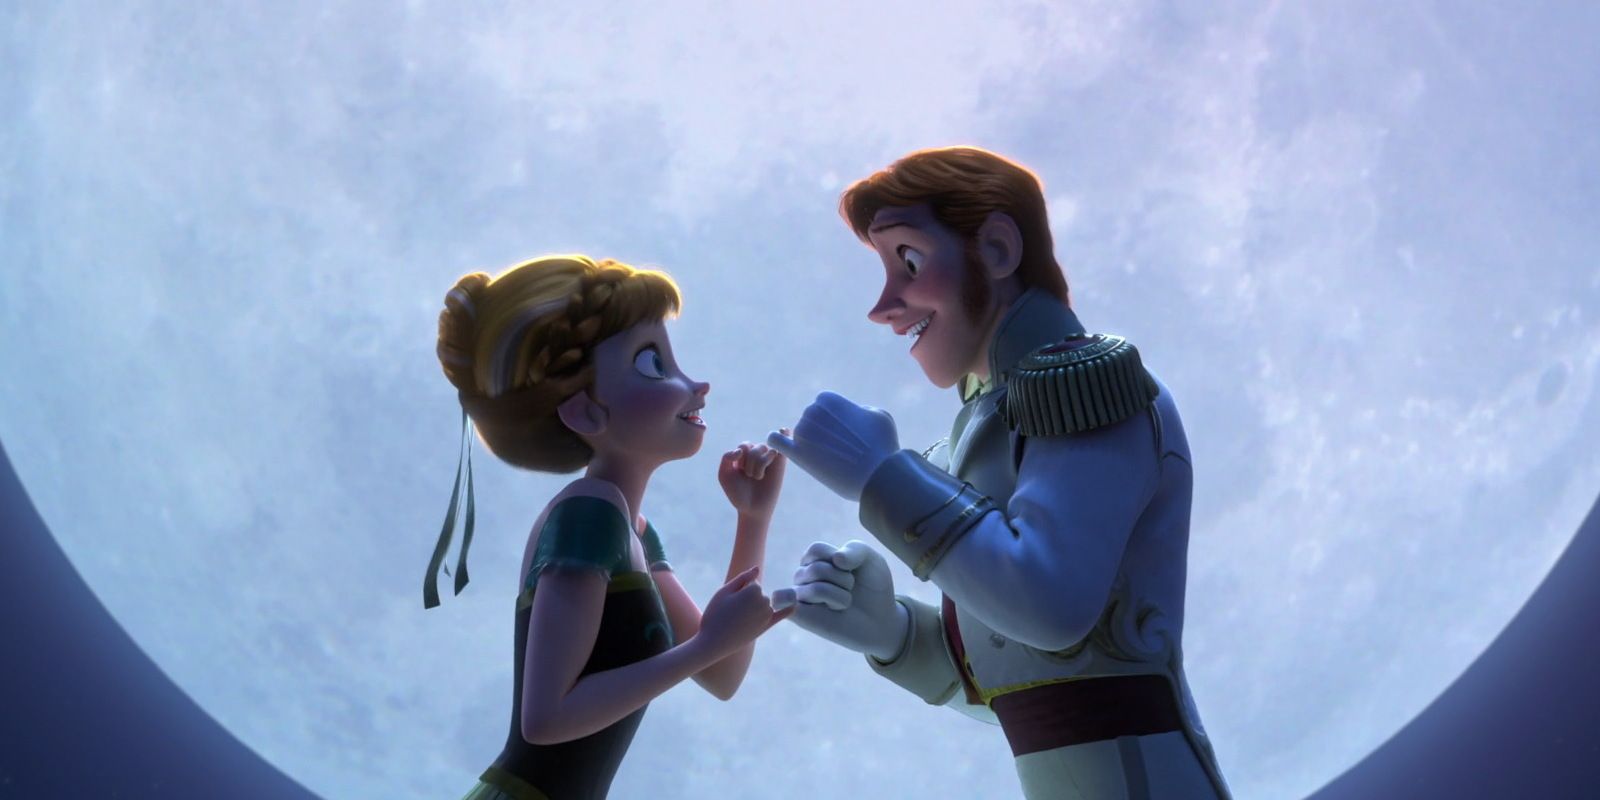 Anna and Hans singing together in front of the moon in Frozen